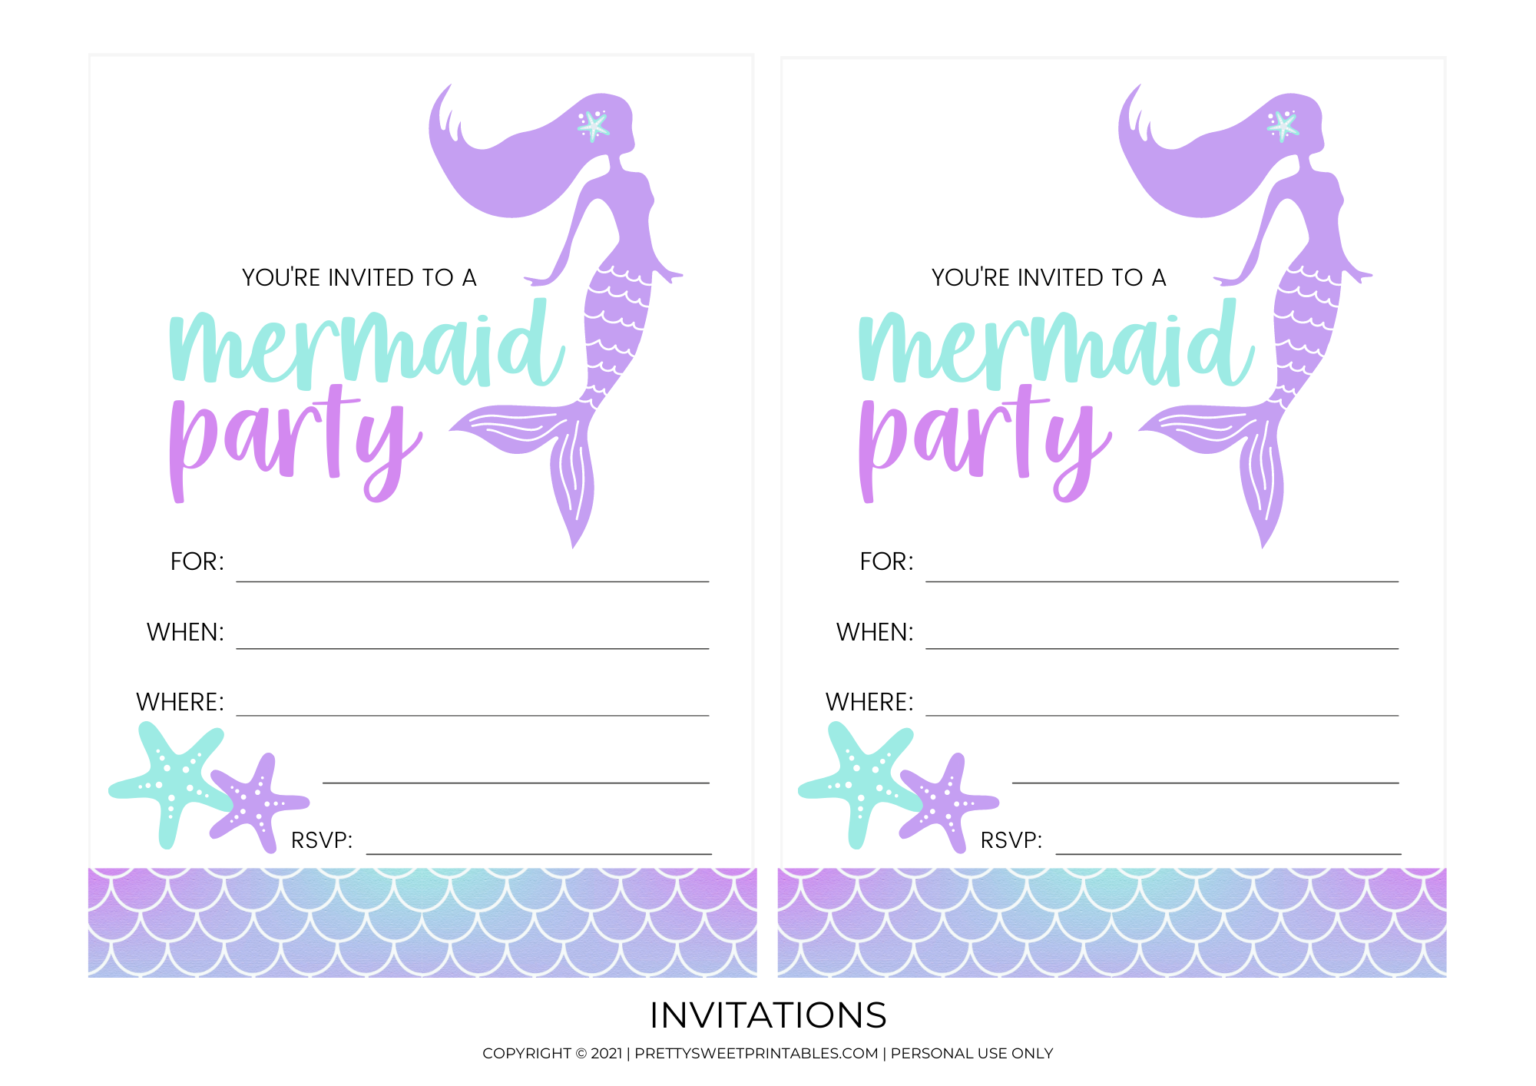 plan-a-mystical-bash-with-these-free-mermaid-party-printables-pretty-sweet